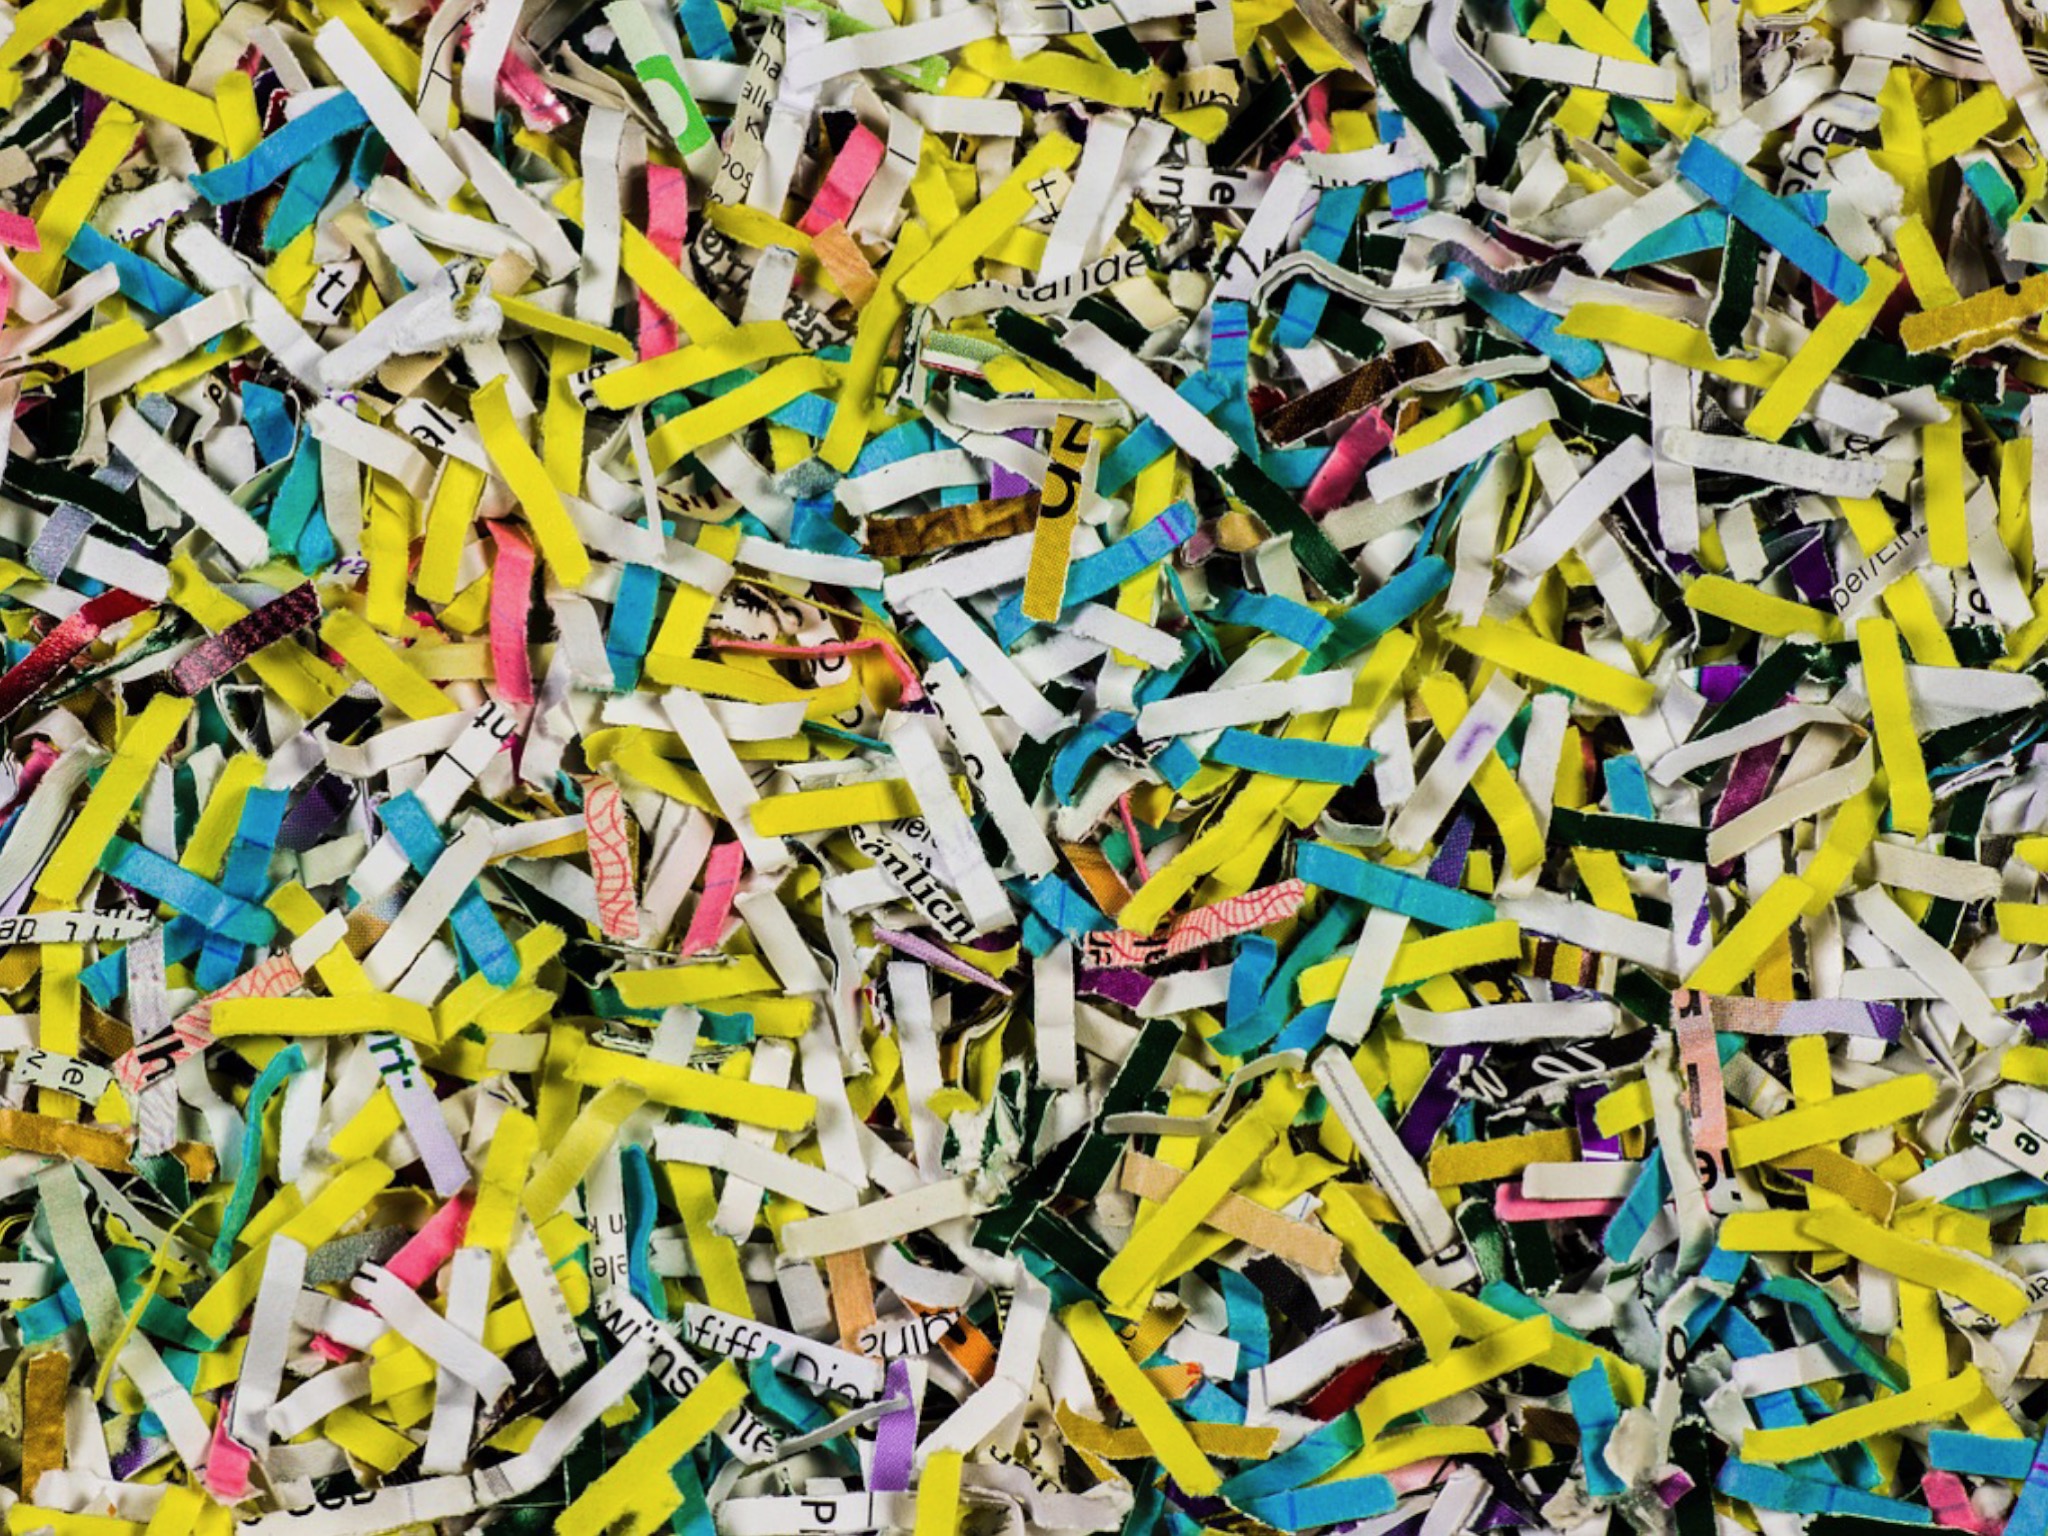 Is Shredded Paper Recyclable? - Earth911